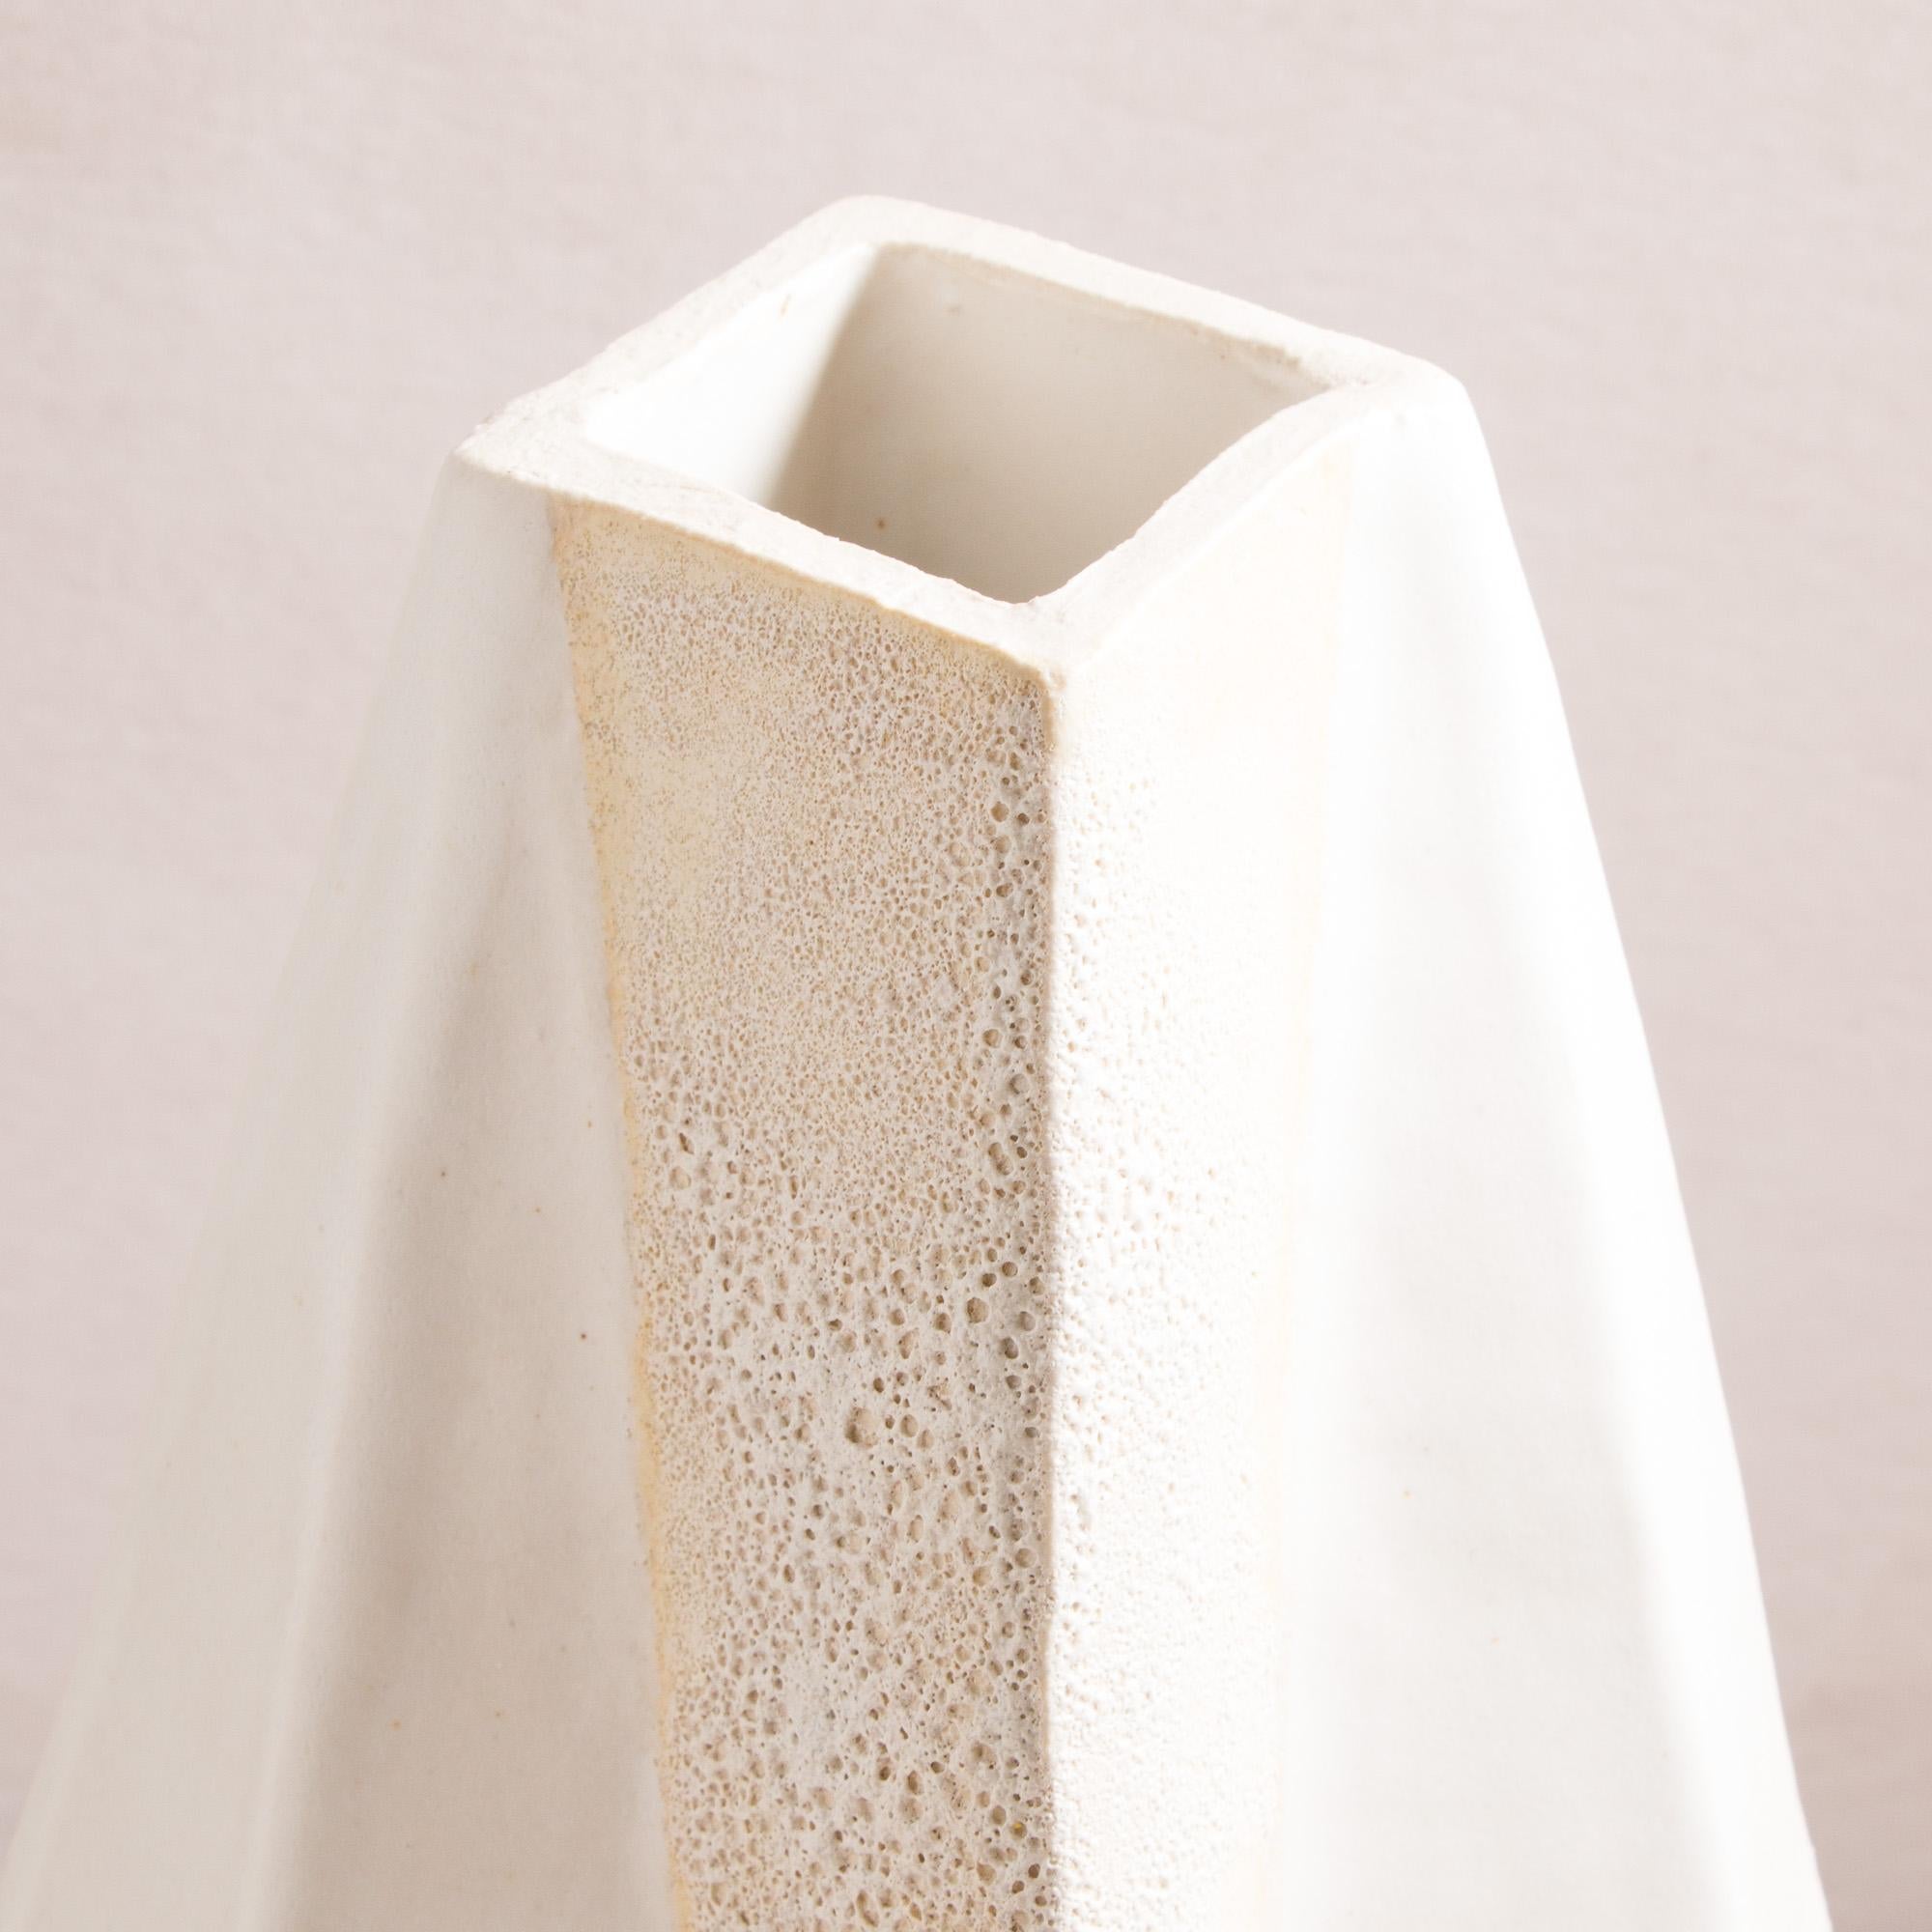 Contemporary 'Warp 01' Large Ceramic Vase with Textured and Satin Matte White Glazes